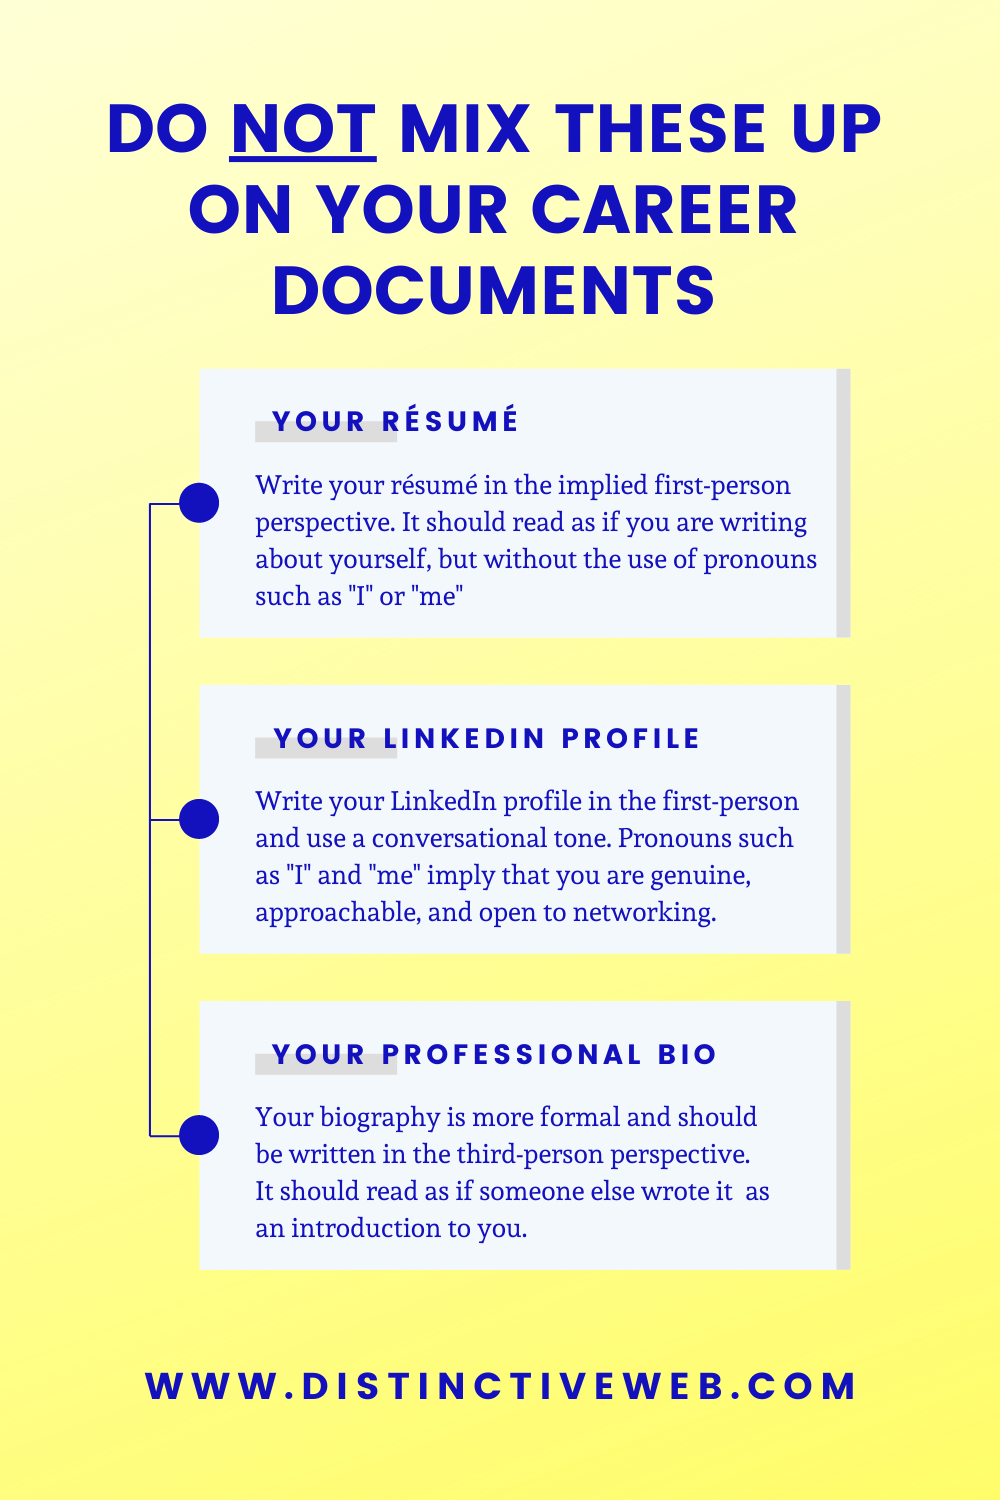 Do Not Mix These Up On Your Resume LinkedIn and Bio